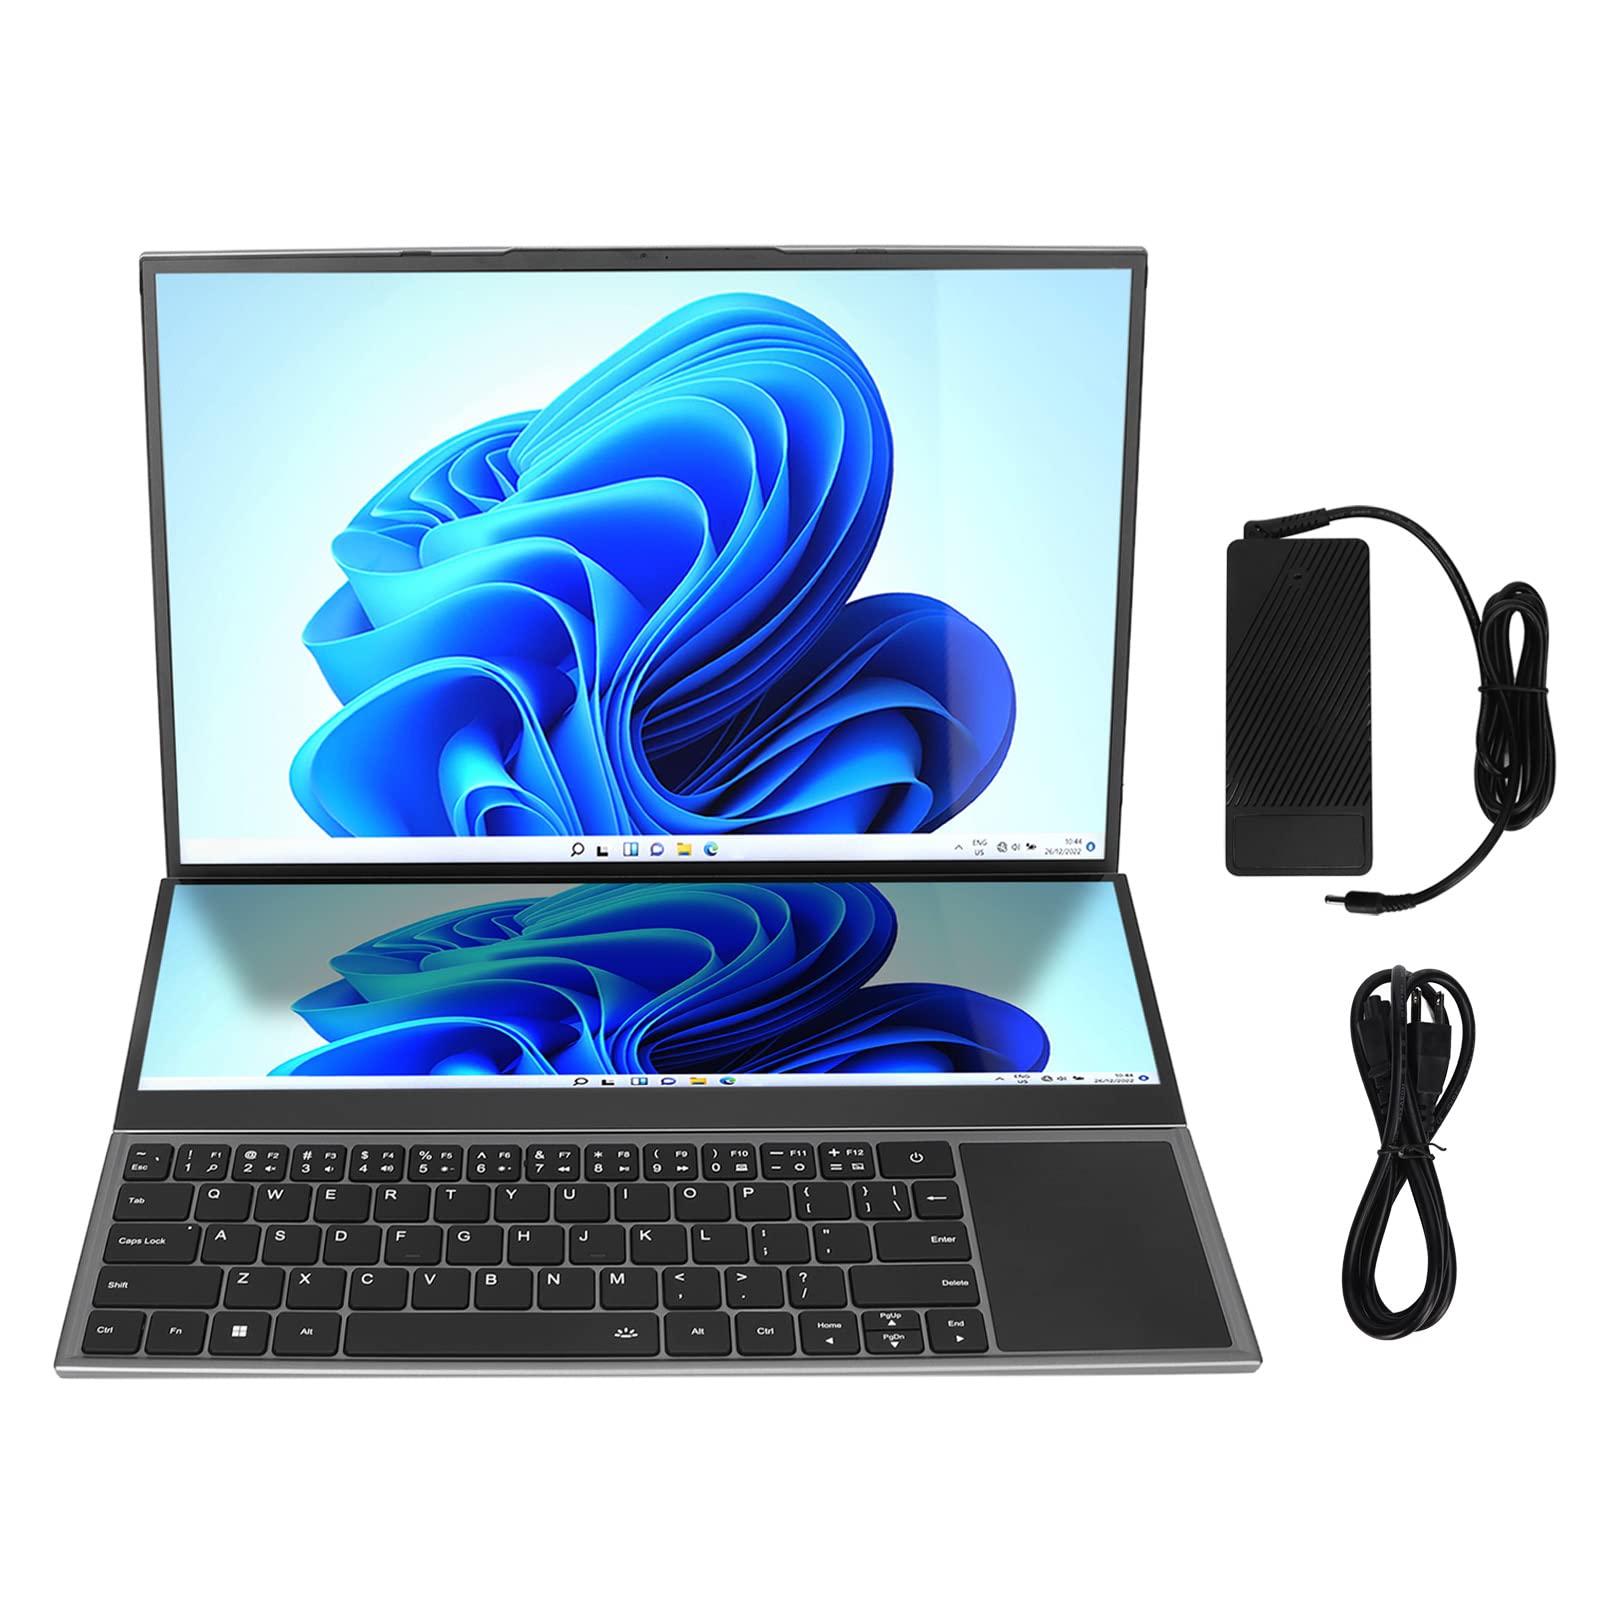 ASHATA Portable Double Screen Laptop Windows 11, 16 inch Main Screen 14 inch Touch Sub Display Laptop with Trackpad, 32GB RAM 128GB ROM, Support WiFi Bluetooth Speakers, 13600mAh Battery